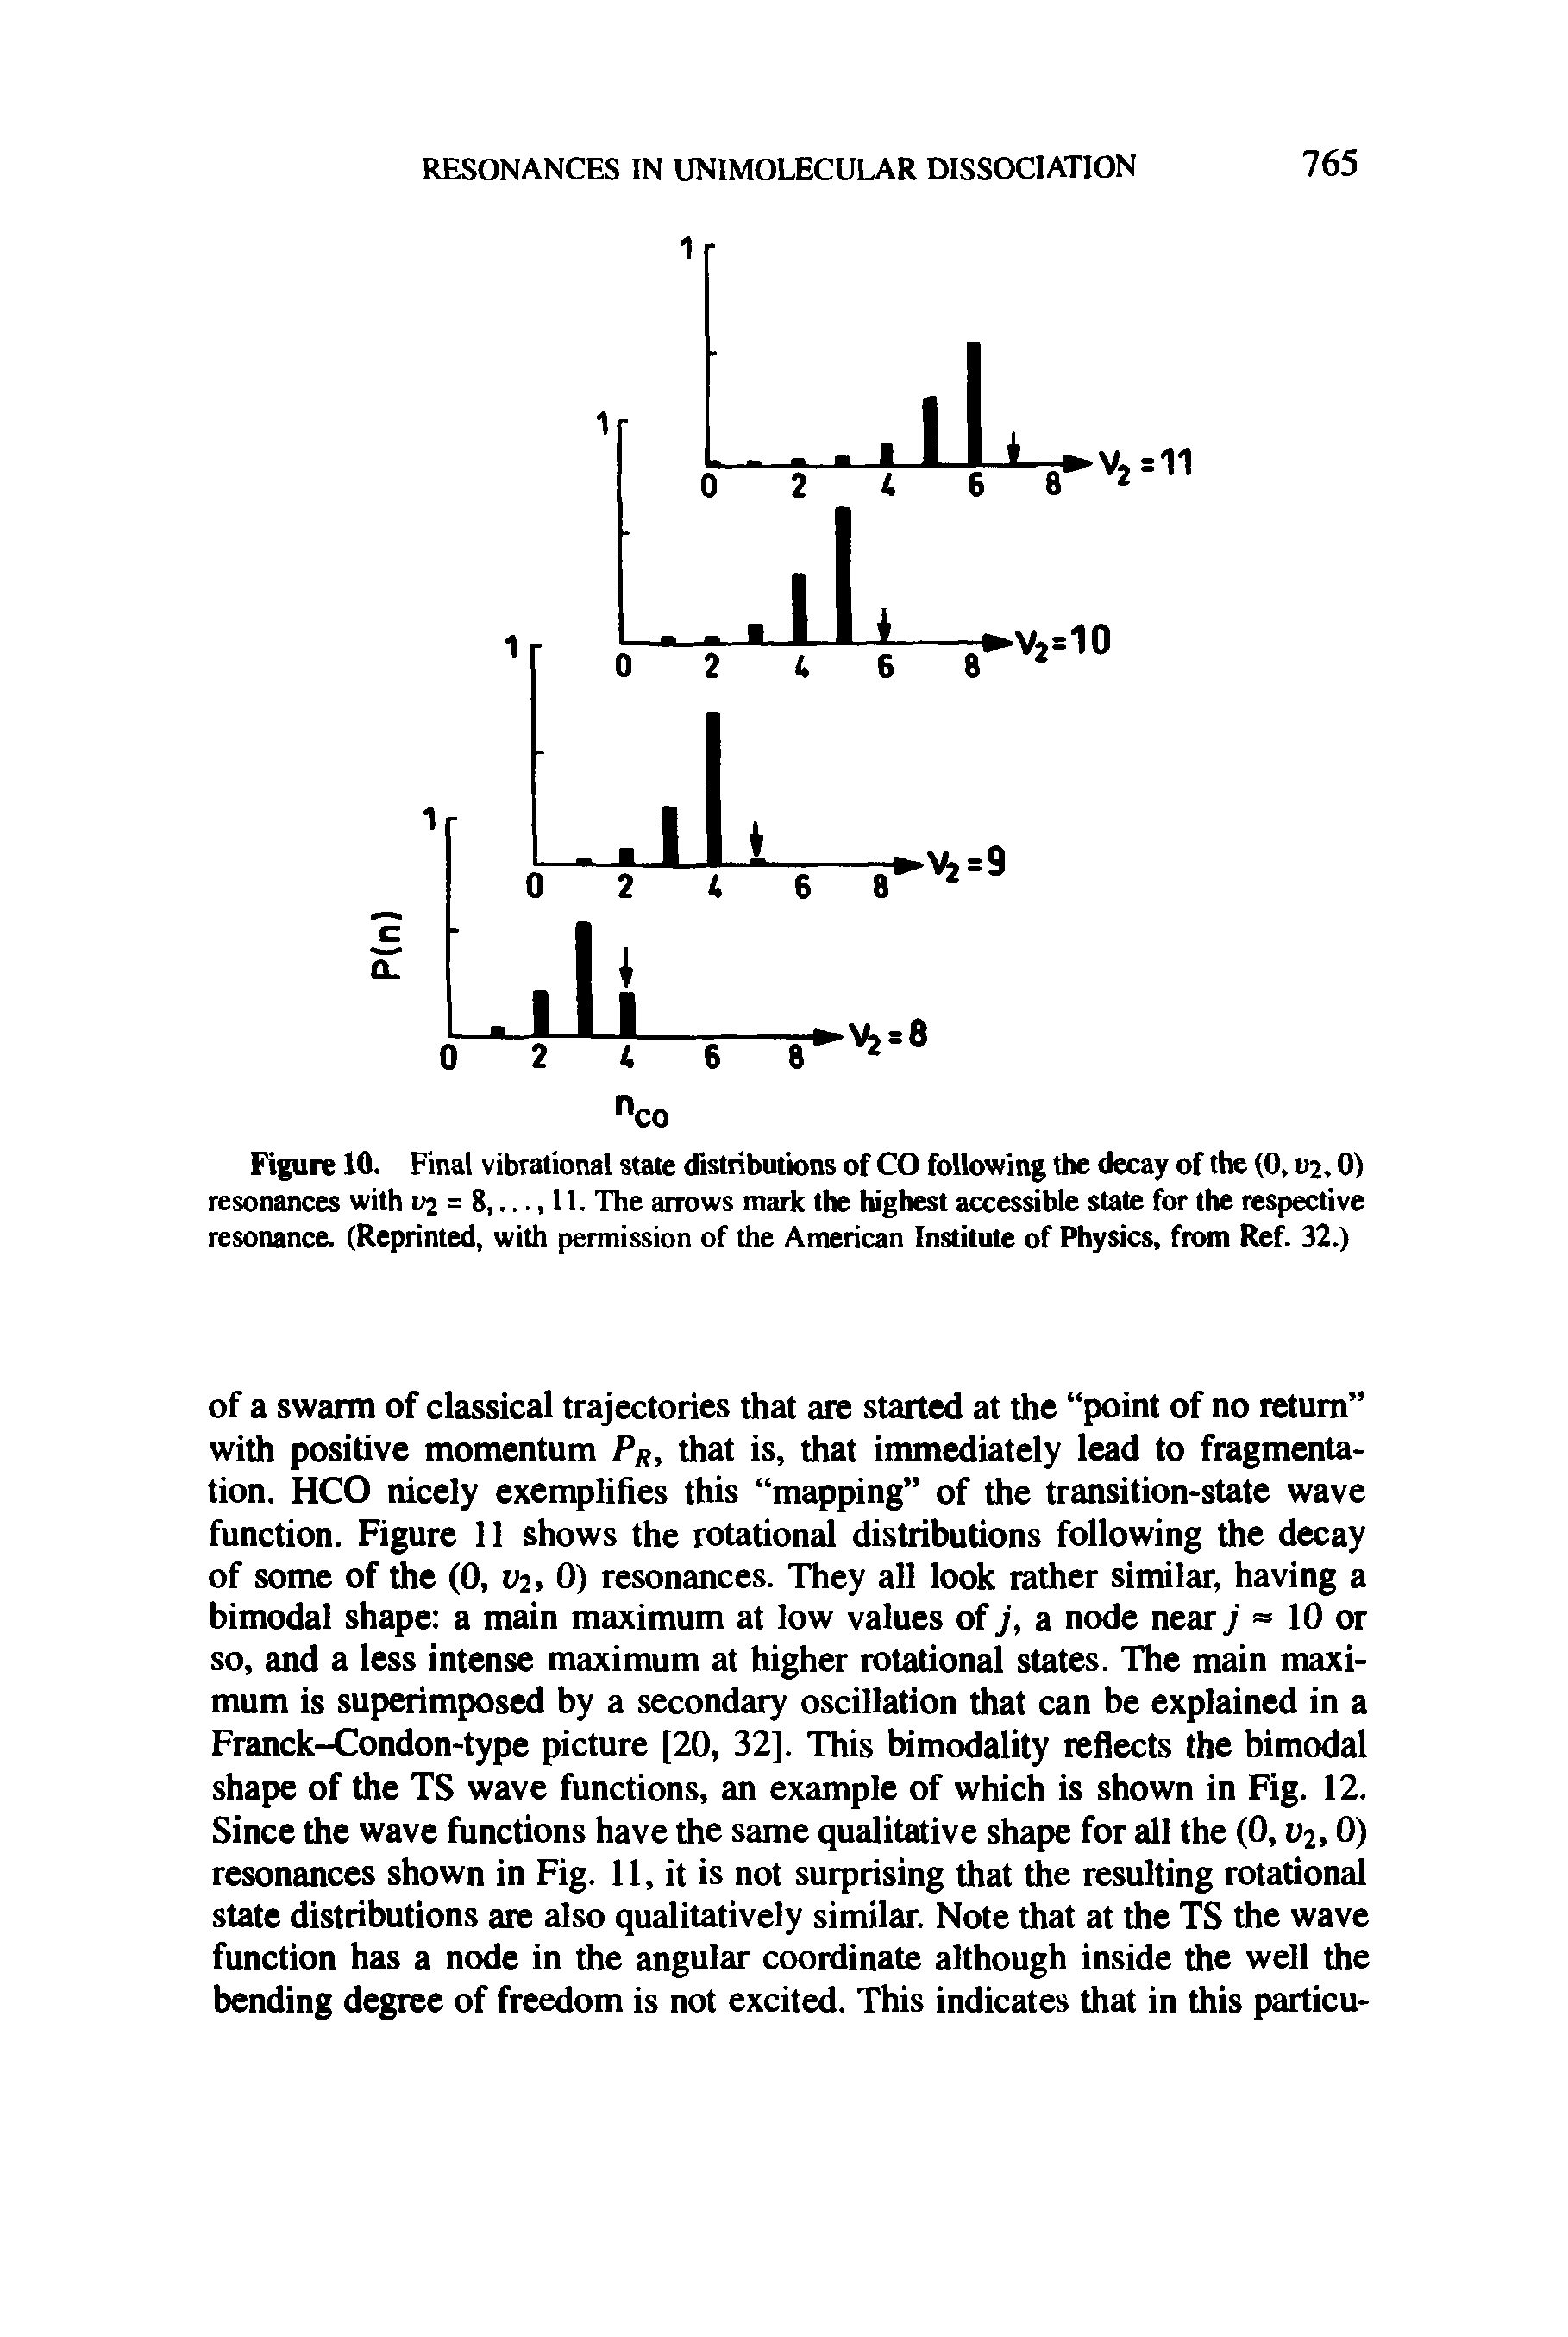 Figure 10. Final vibrational state distributions of CO following the decay of the (0. u2,0) resonances with u2 = 8,..., 11. The arrows mark the highest accessible state for the respective resonance. (Reprinted, with permission of the American Institute of Physics, from Ref. 32.)...